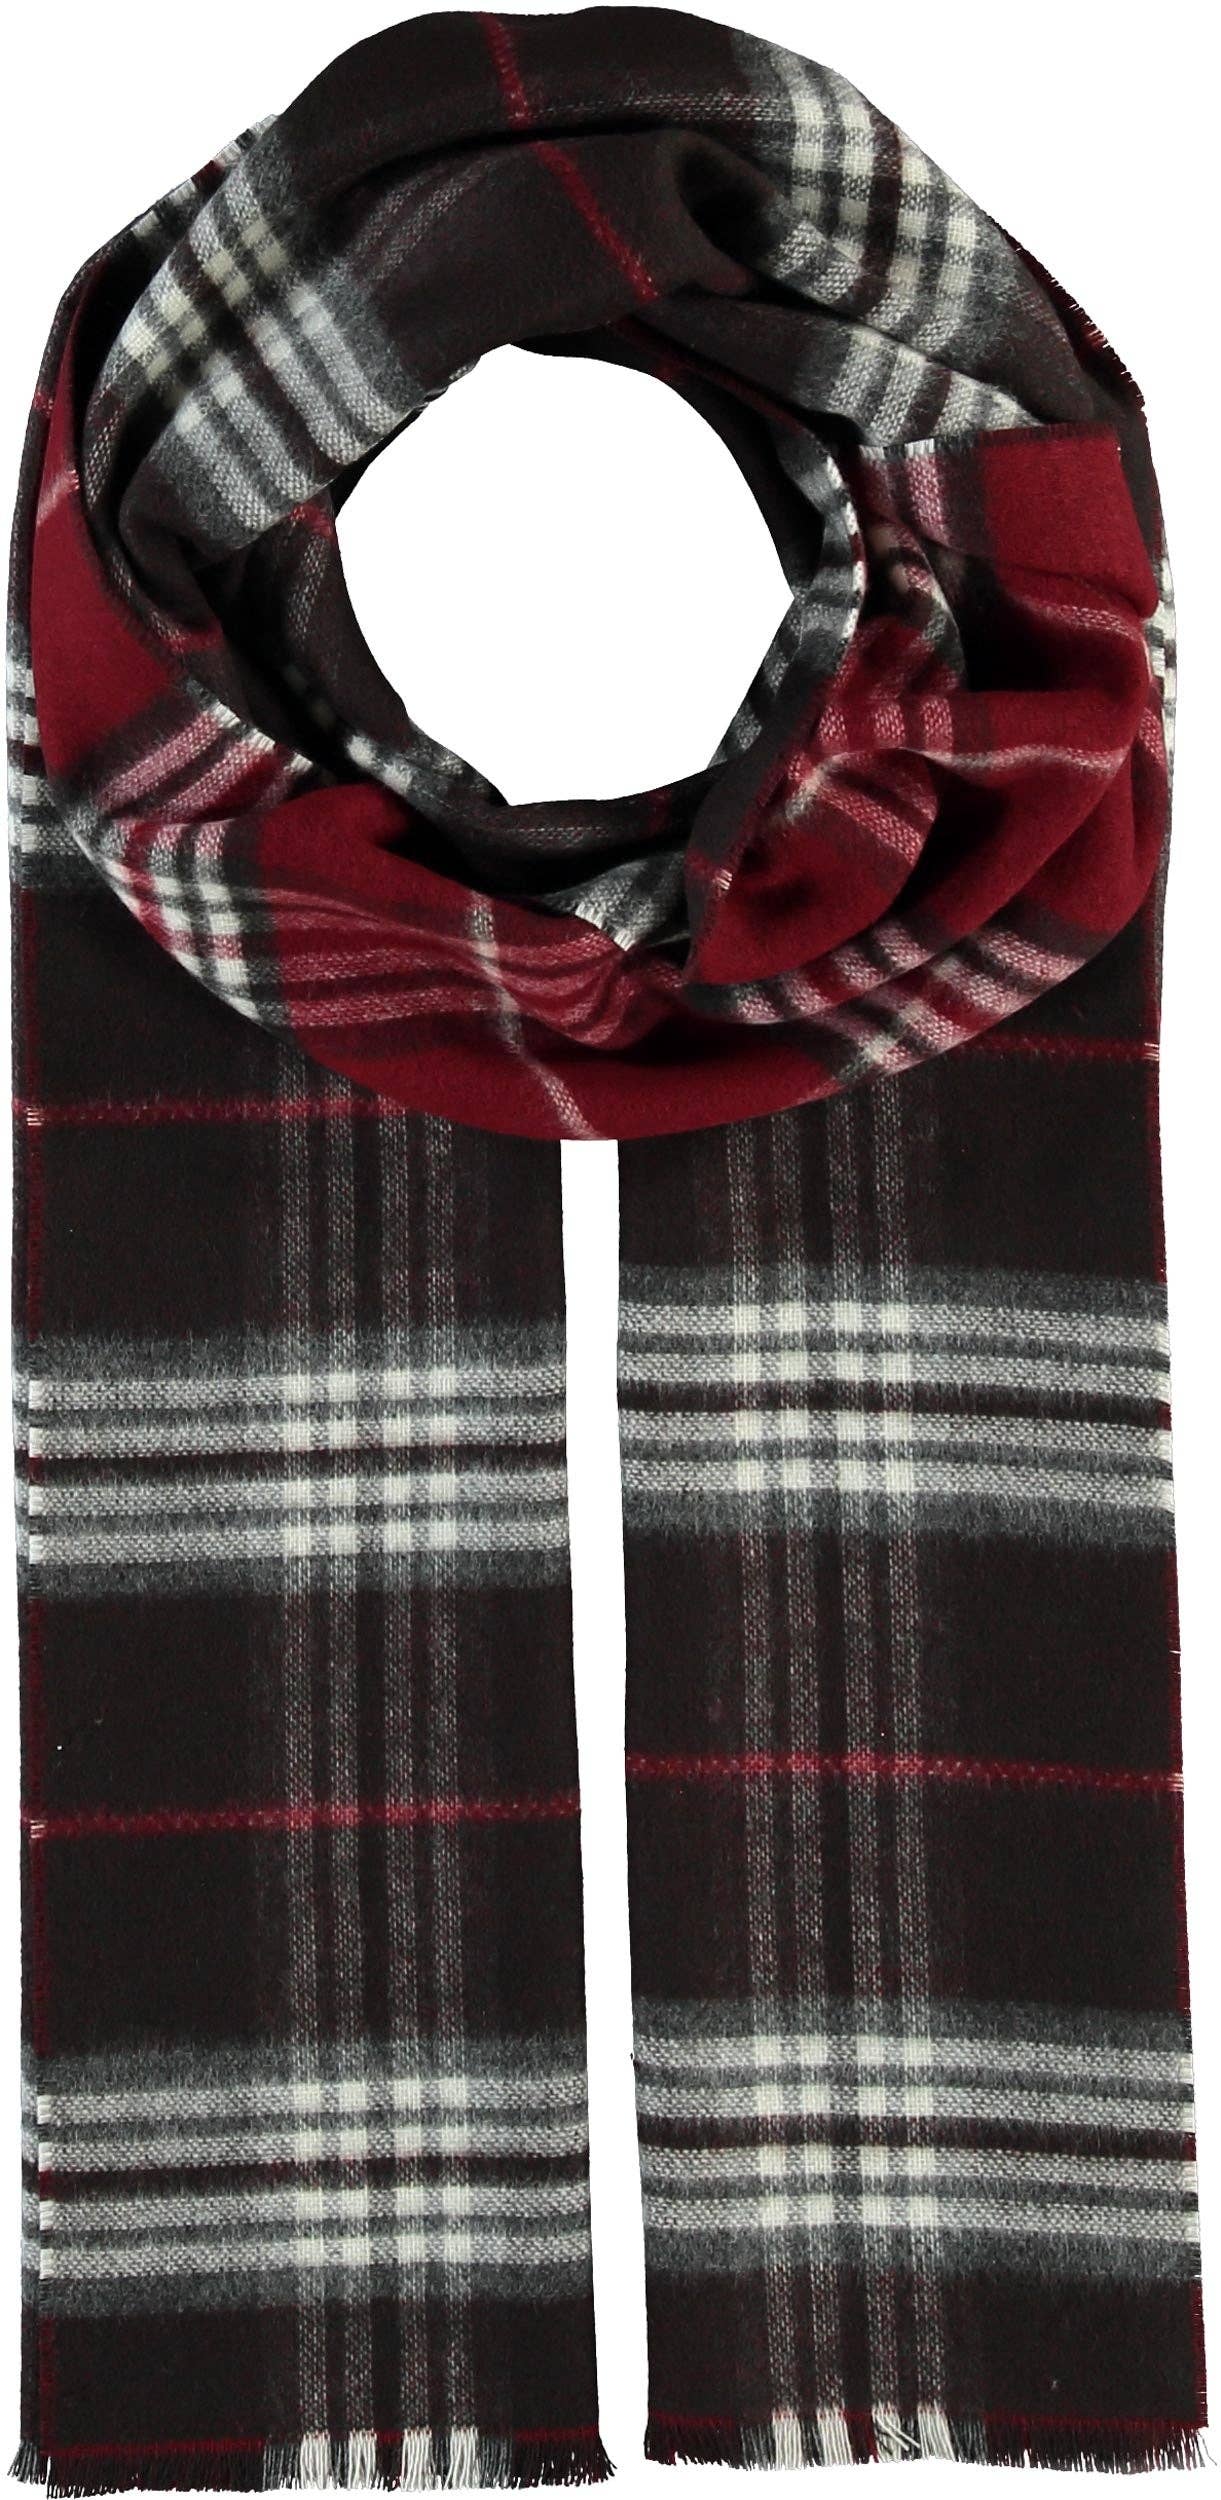 FRAAS - The Scarf Company - FRAAS Plaid Reversible Cashmink® Scarf